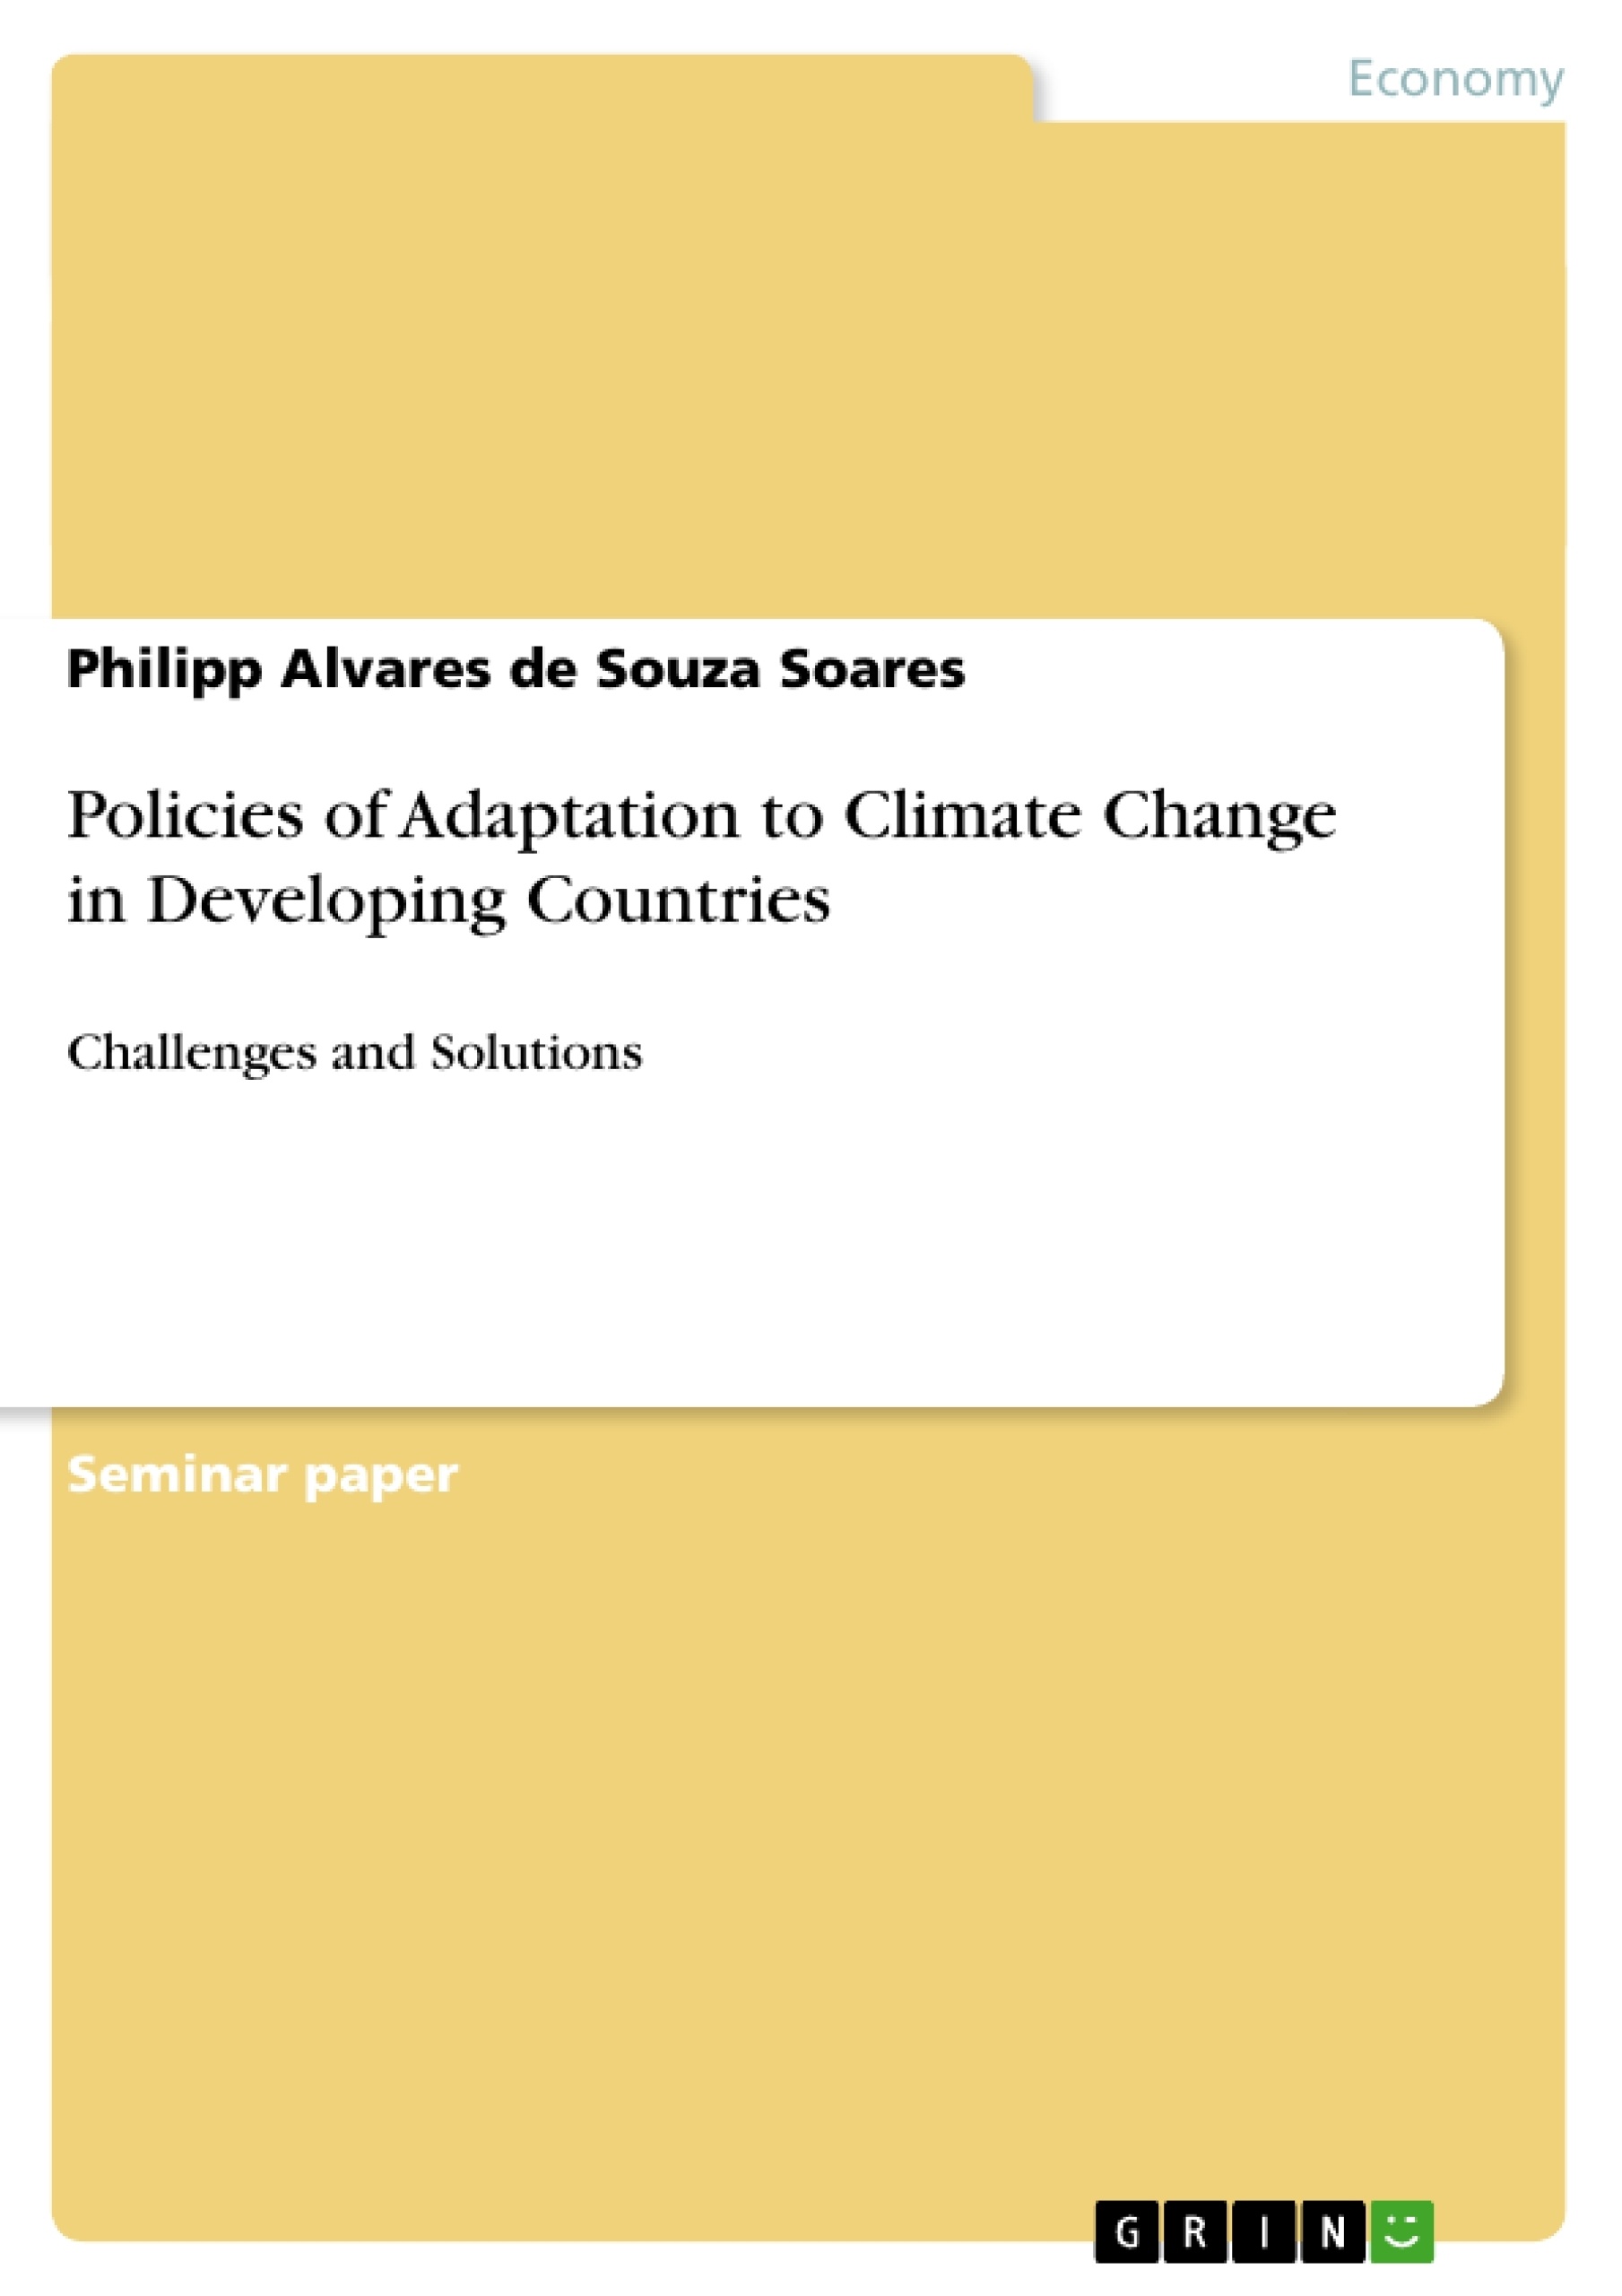 Title: Policies of Adaptation to Climate Change in Developing Countries